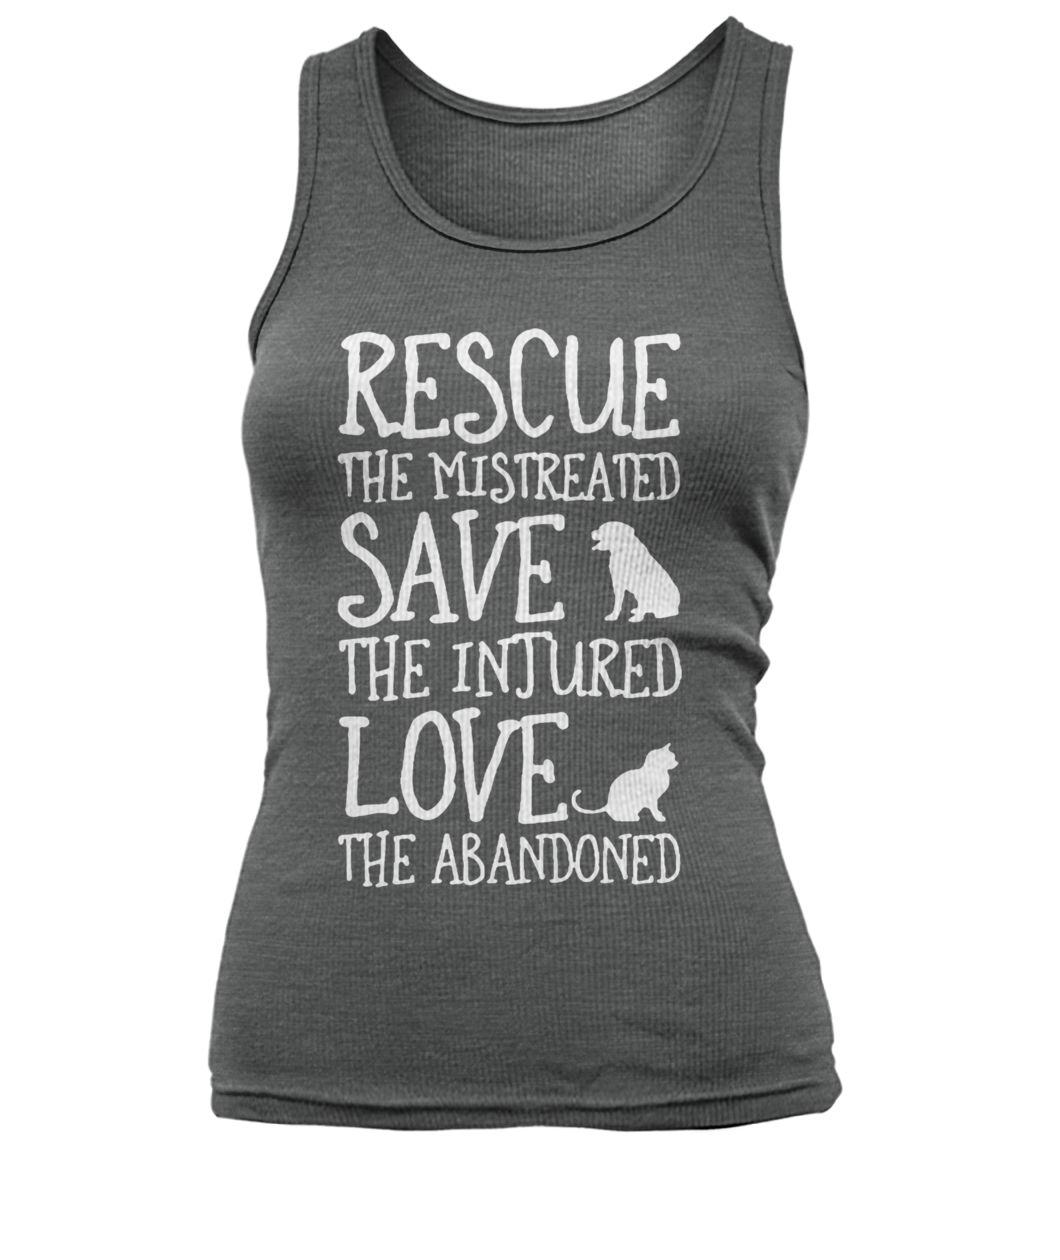 Rescue the mistreated save the injured love the abandoned women's tank top